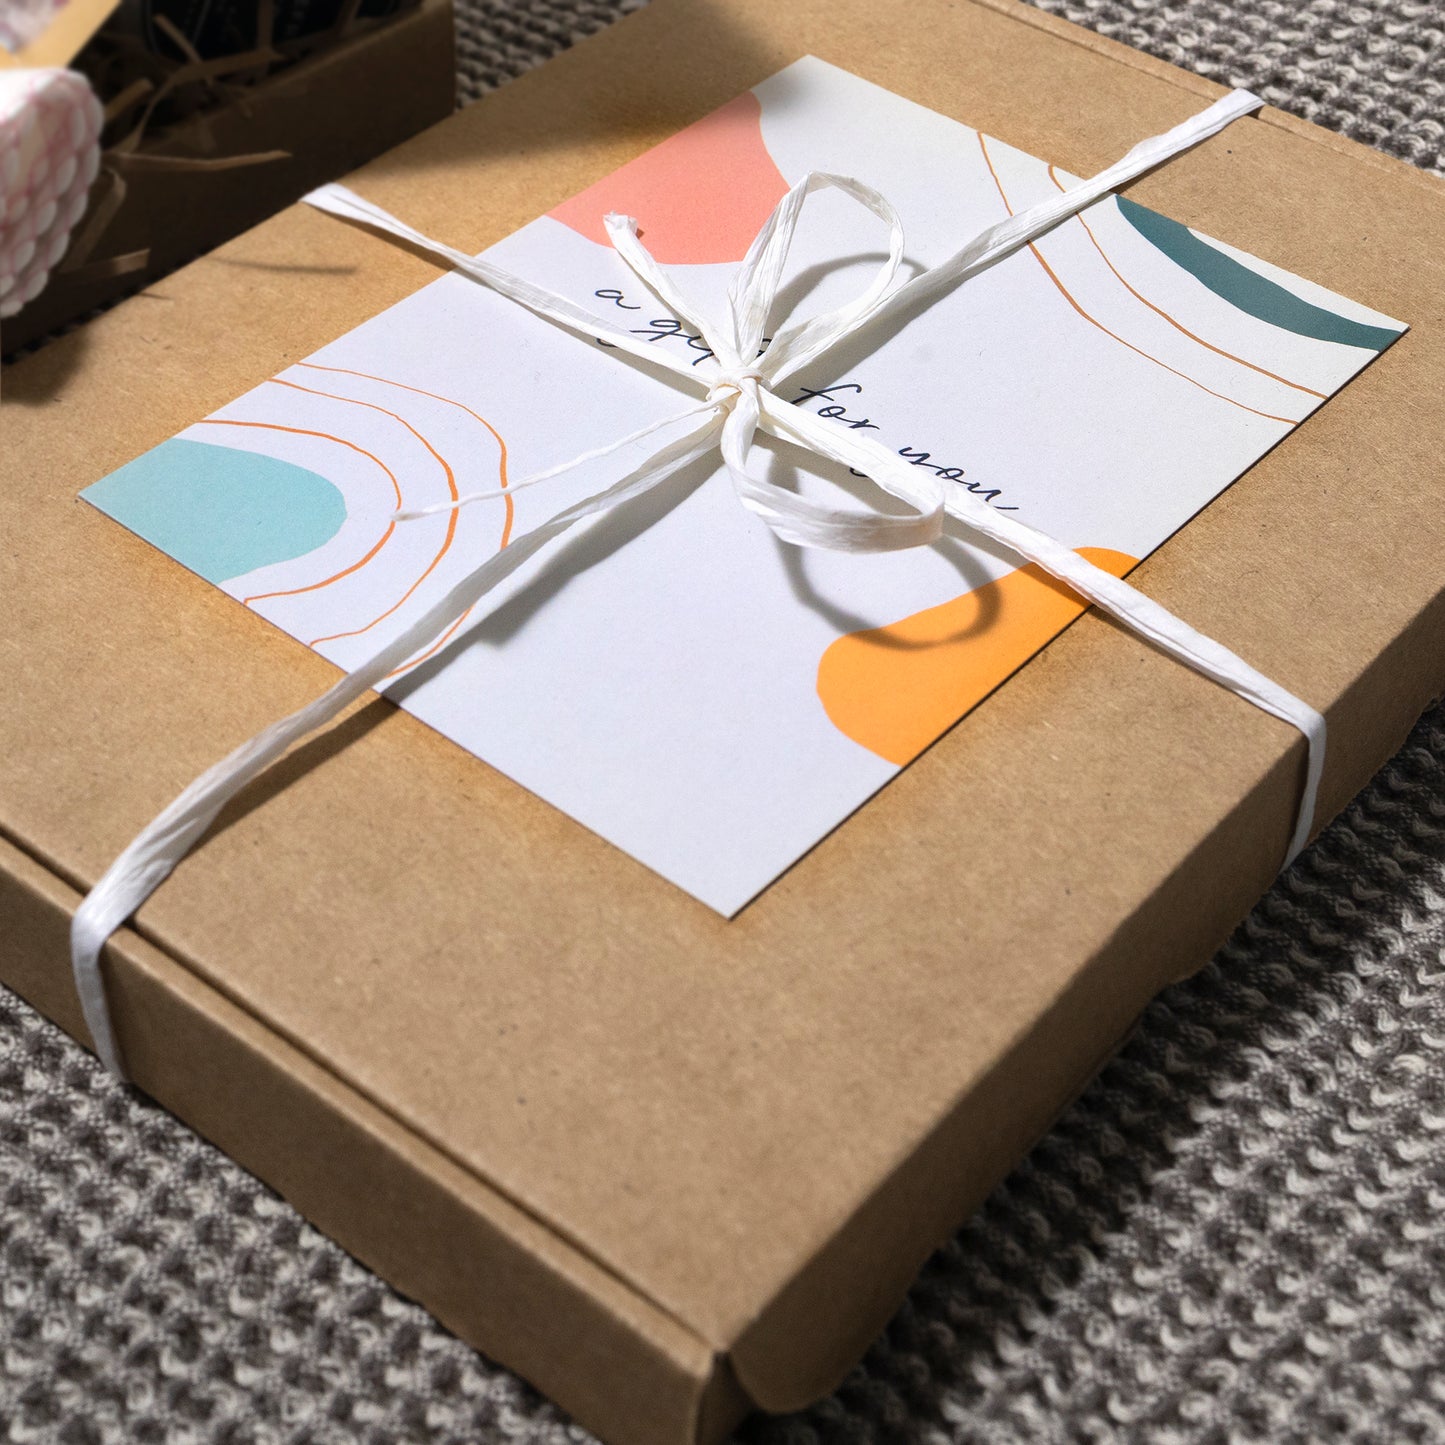 A cardboard gift box tied with a white string bow, topped with a card featuring abstract pastel art and handwritten text "A gift for you". The box is placed on a herringbone patterned fabric.